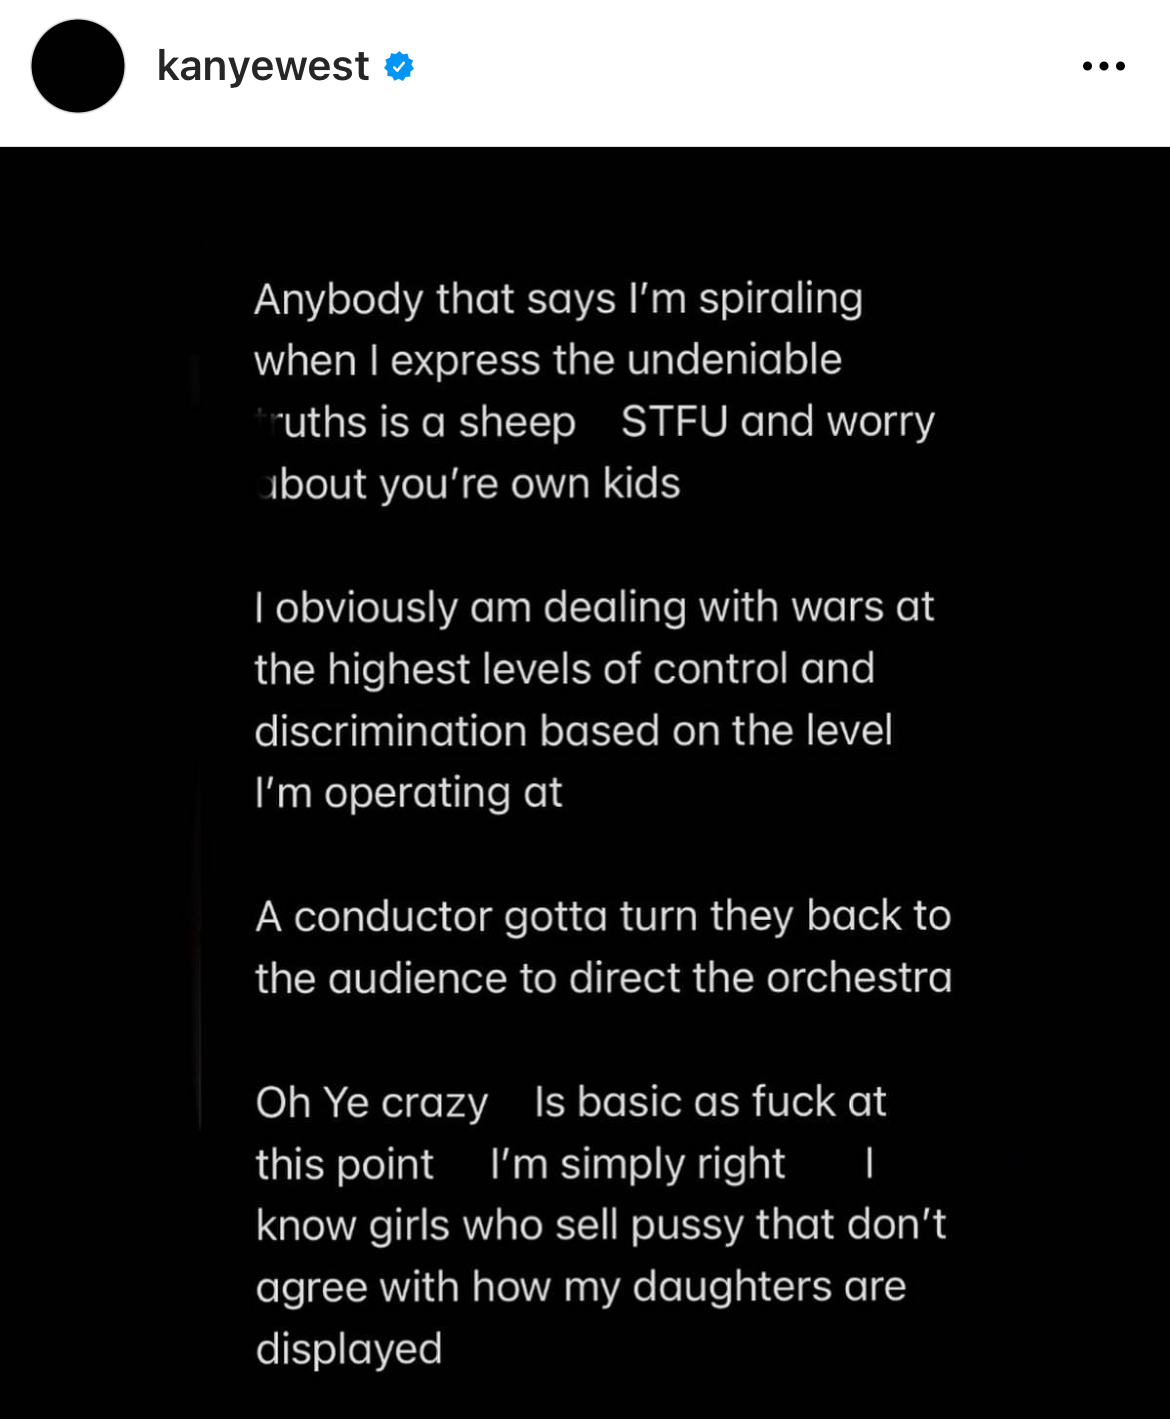 Kanye West Instagram Meltdown - screenshot - kanyewest Anybody that says I'm spiraling when I express the undeniable truths is a sheep Stfu and worry about you're own kids I obviously am dealing with wars at the highest levels of control and discriminatio